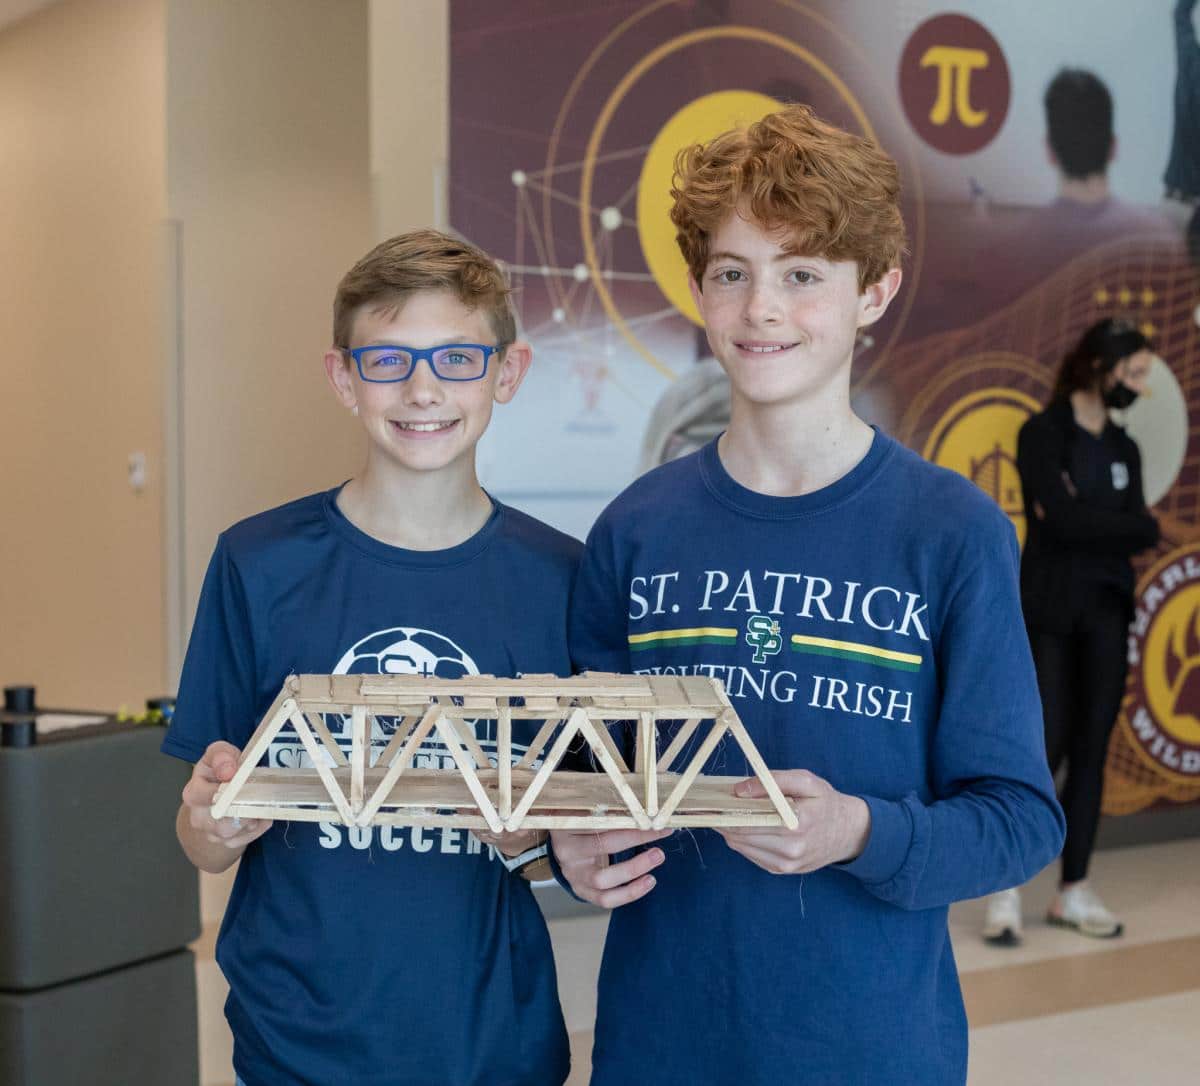 https://prcc.edu/wp-content/uploads/2022/07/David-Merrel-and-Connor-McElroy-from-St.-Patrick-team-with-their-bridge.jpg